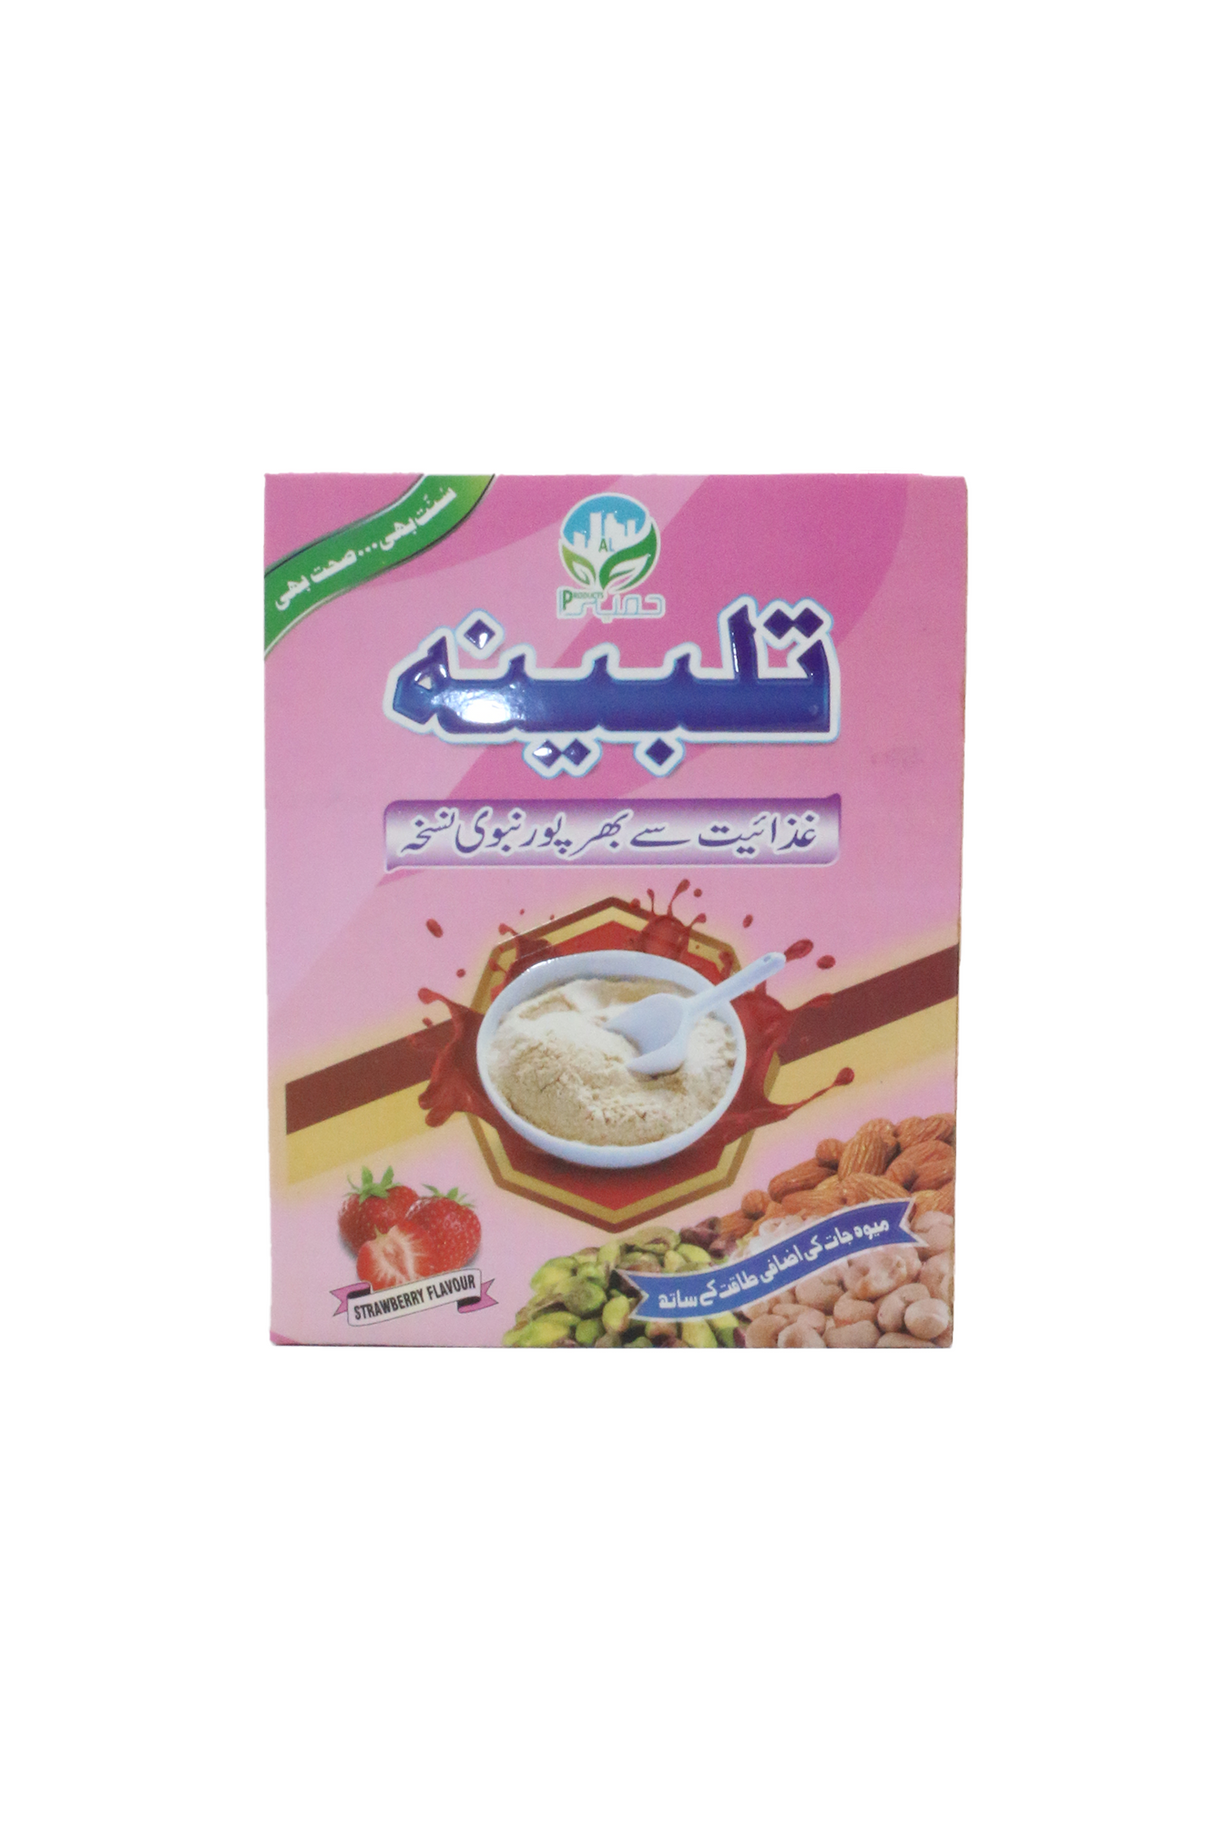 talbina cereal strawberry flavour 200g